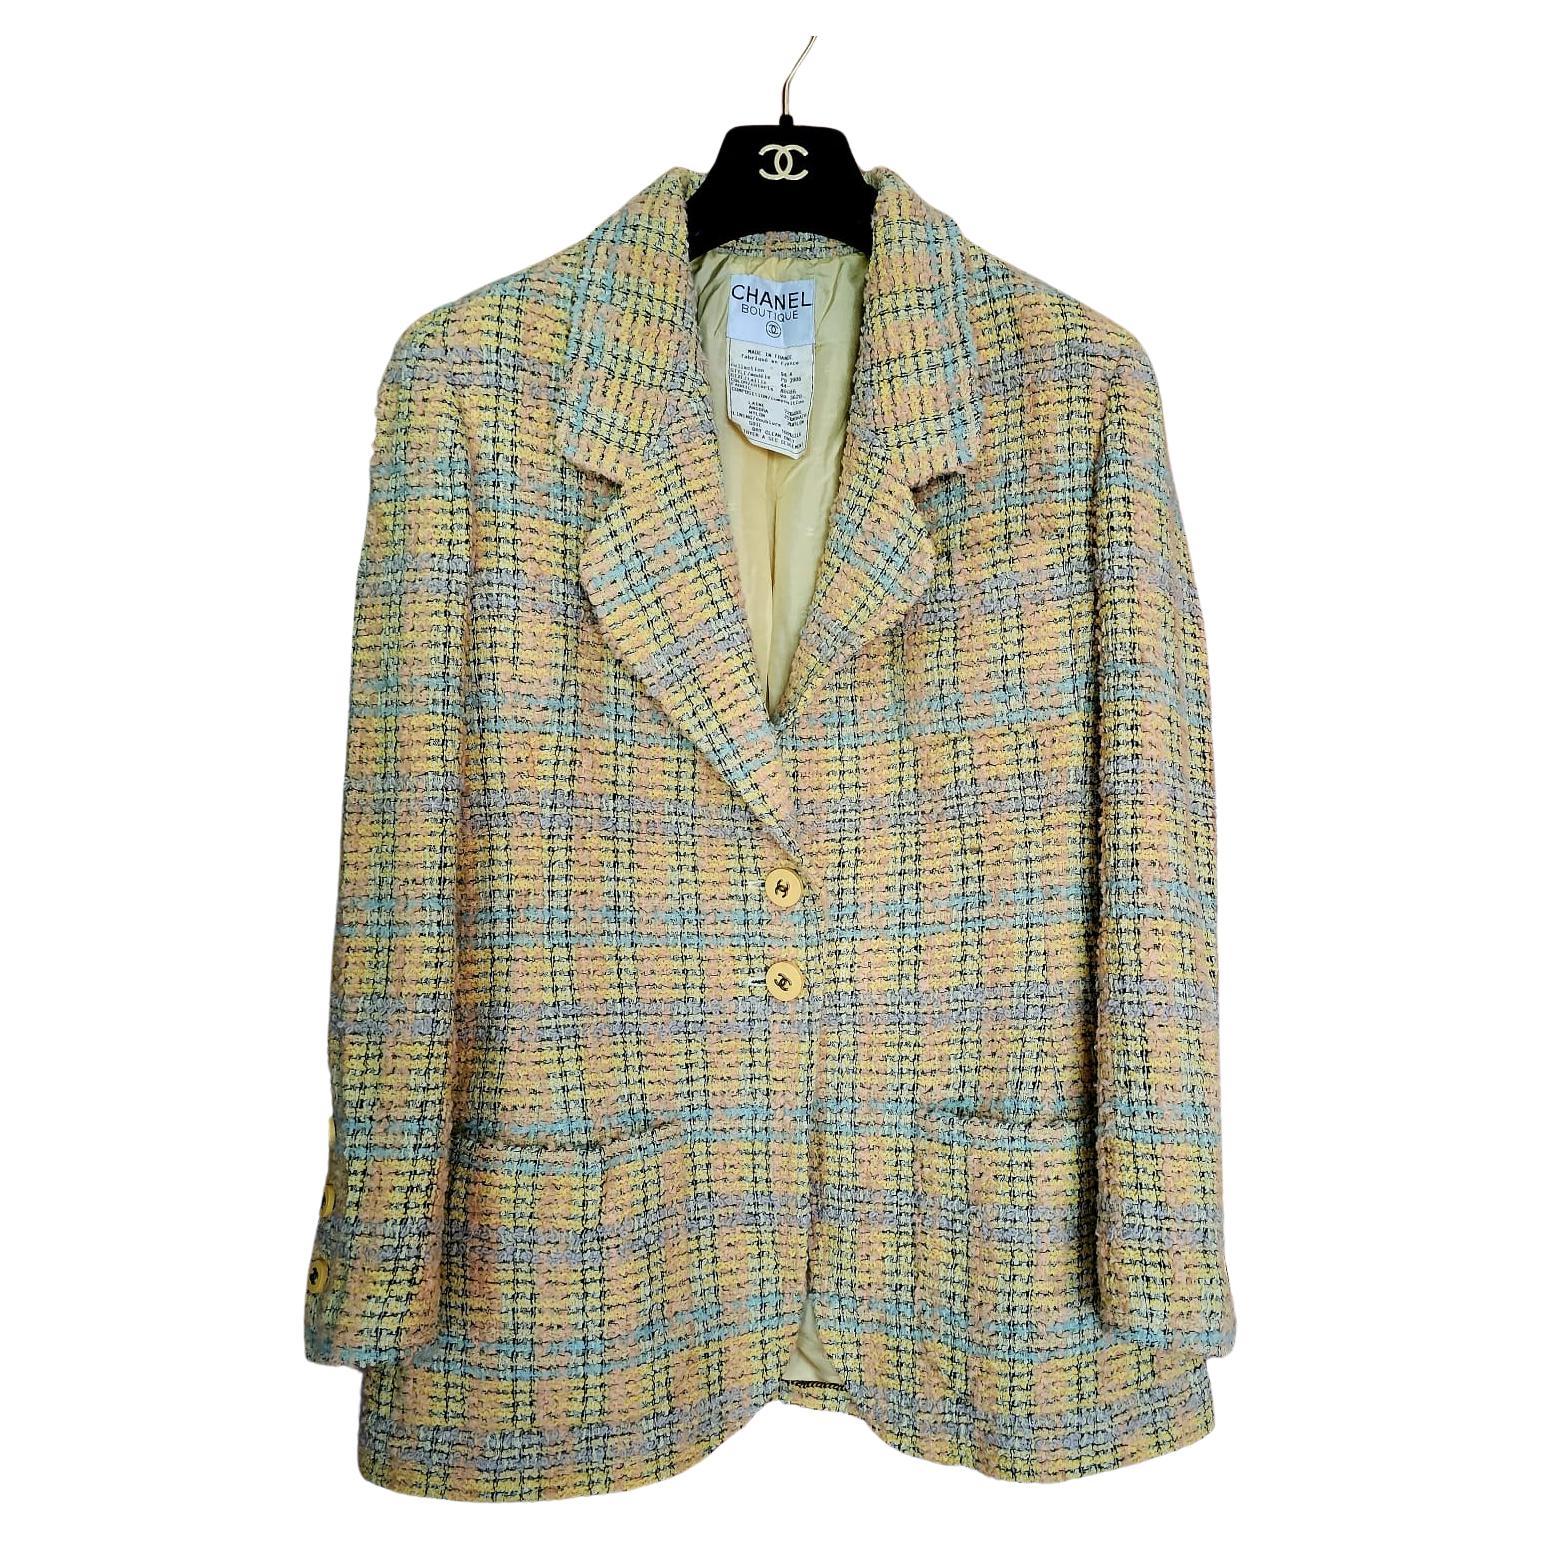 Rare Iconic Vintage 1994 Yellow Tweed CC Jacket For Sale